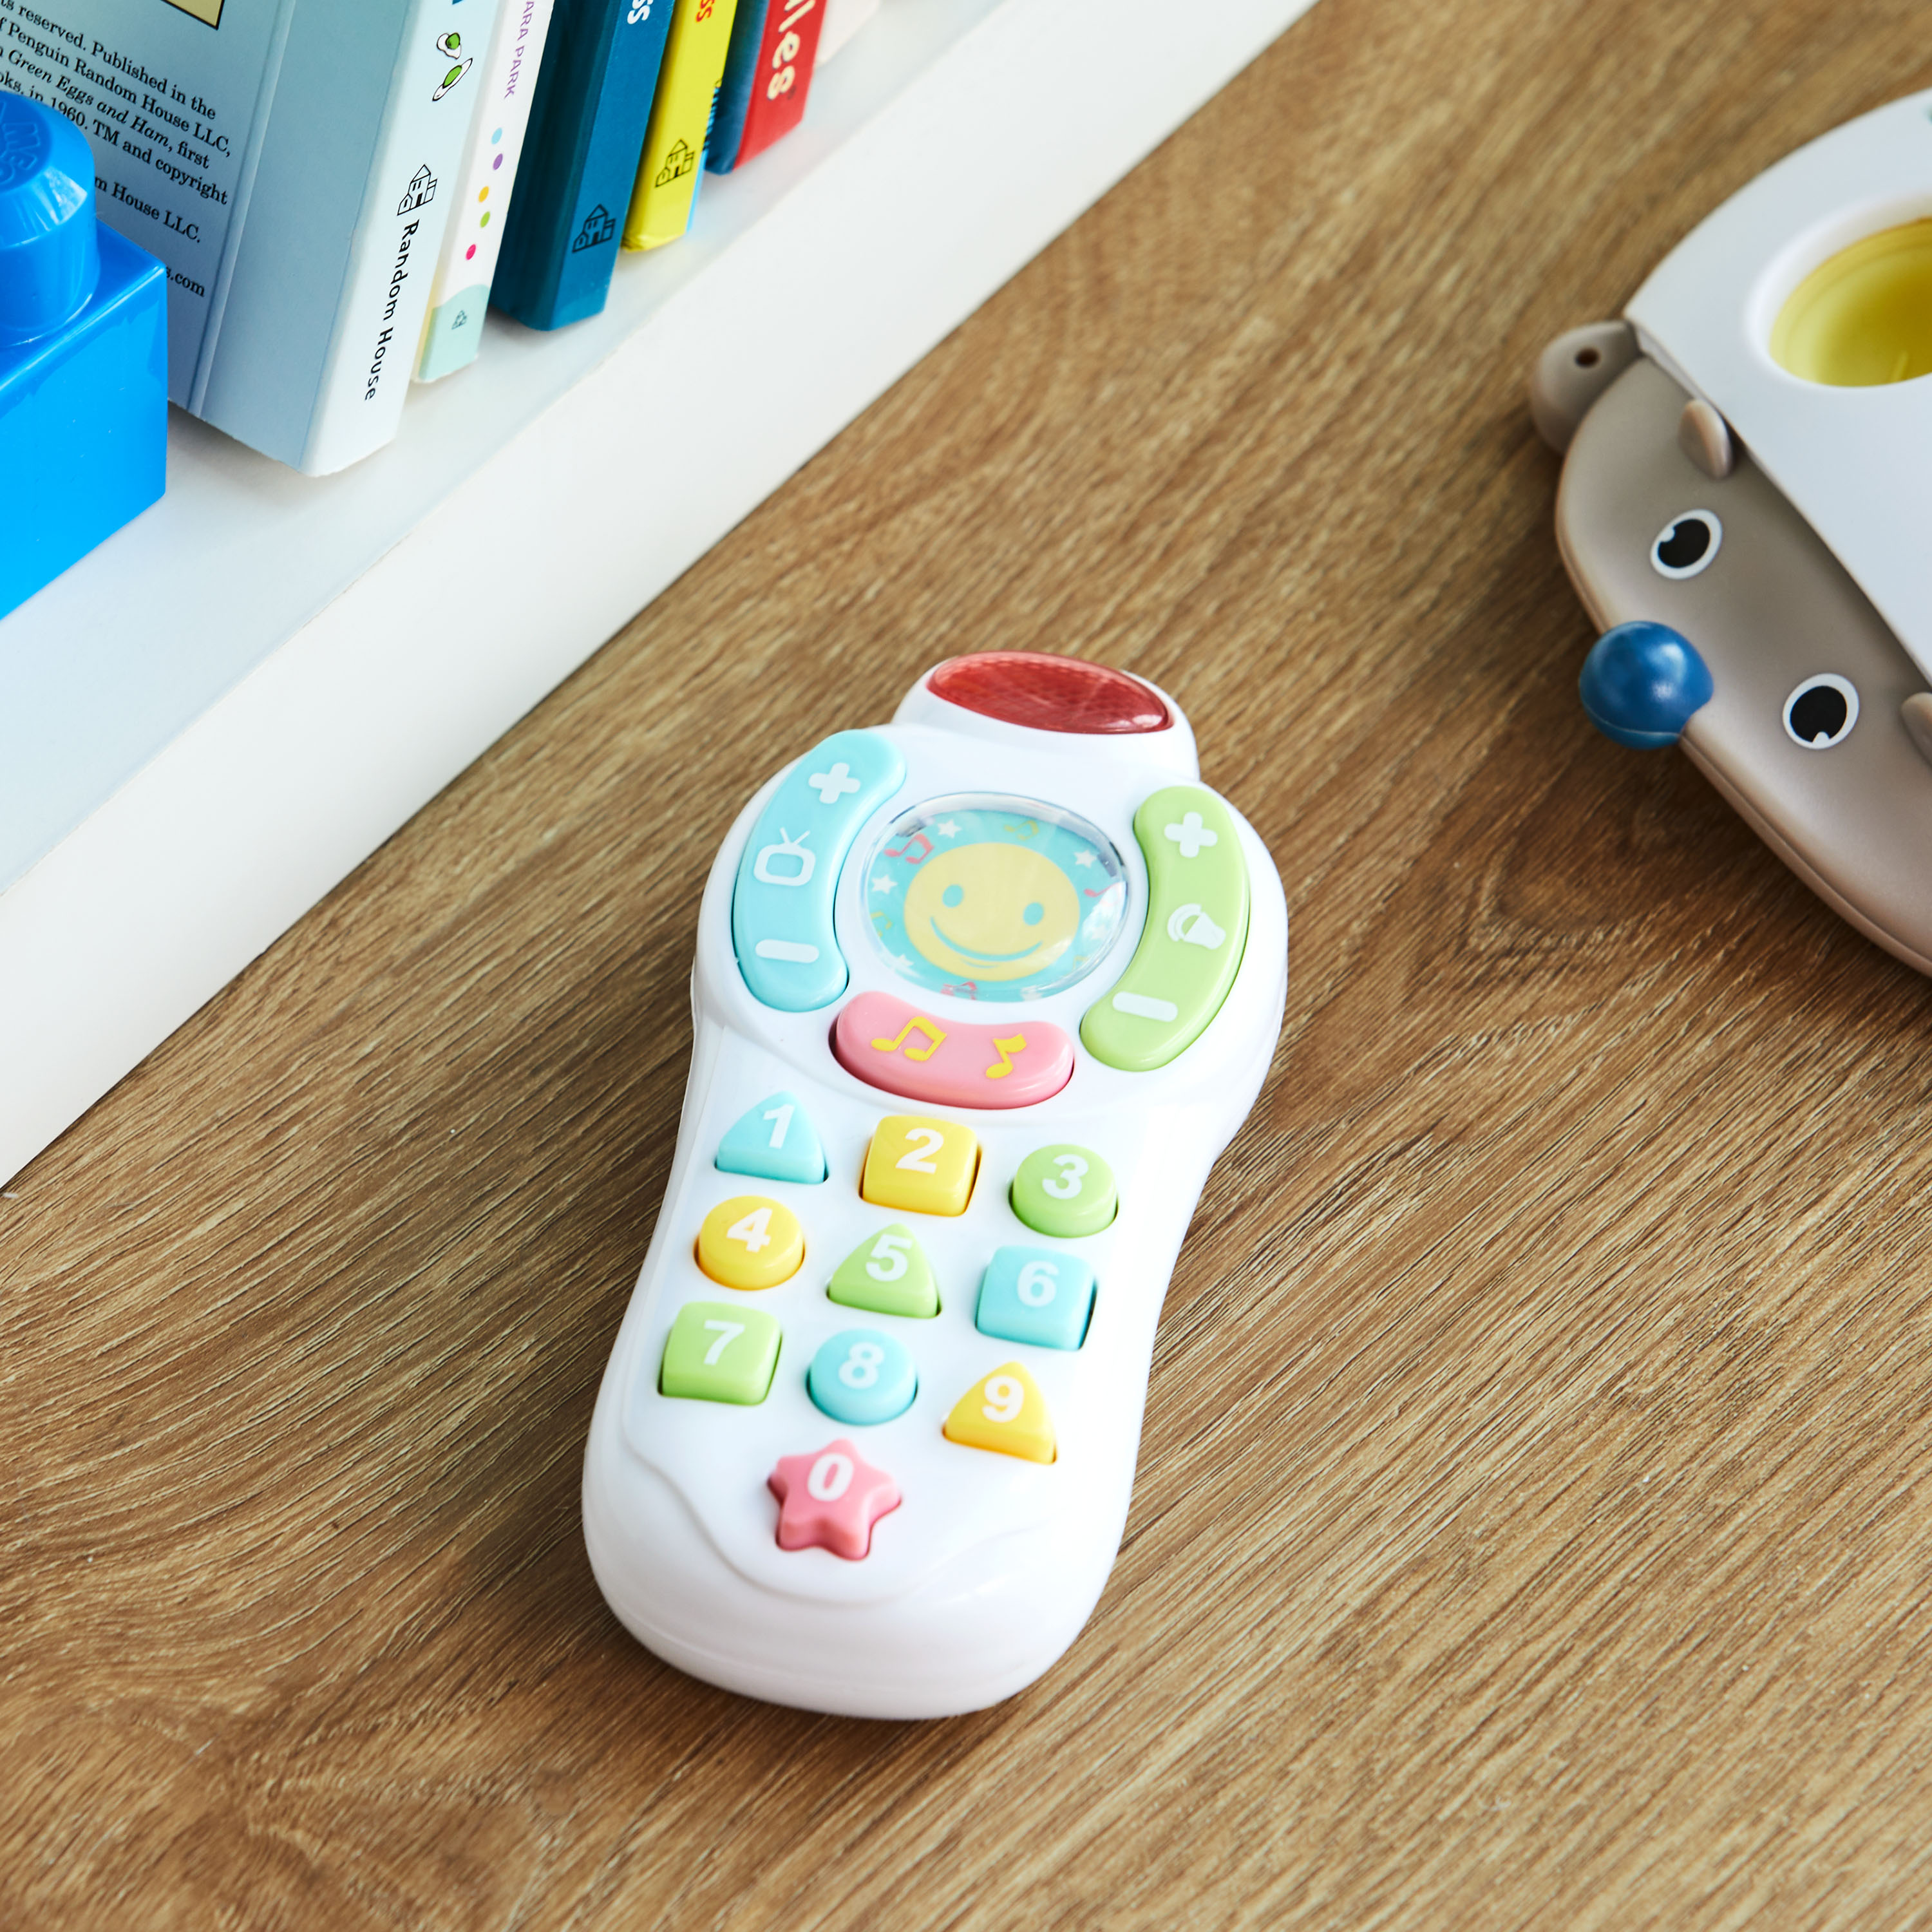 Spark Create Imagine Electronic Learning Remote Toddler Toy - image 5 of 10